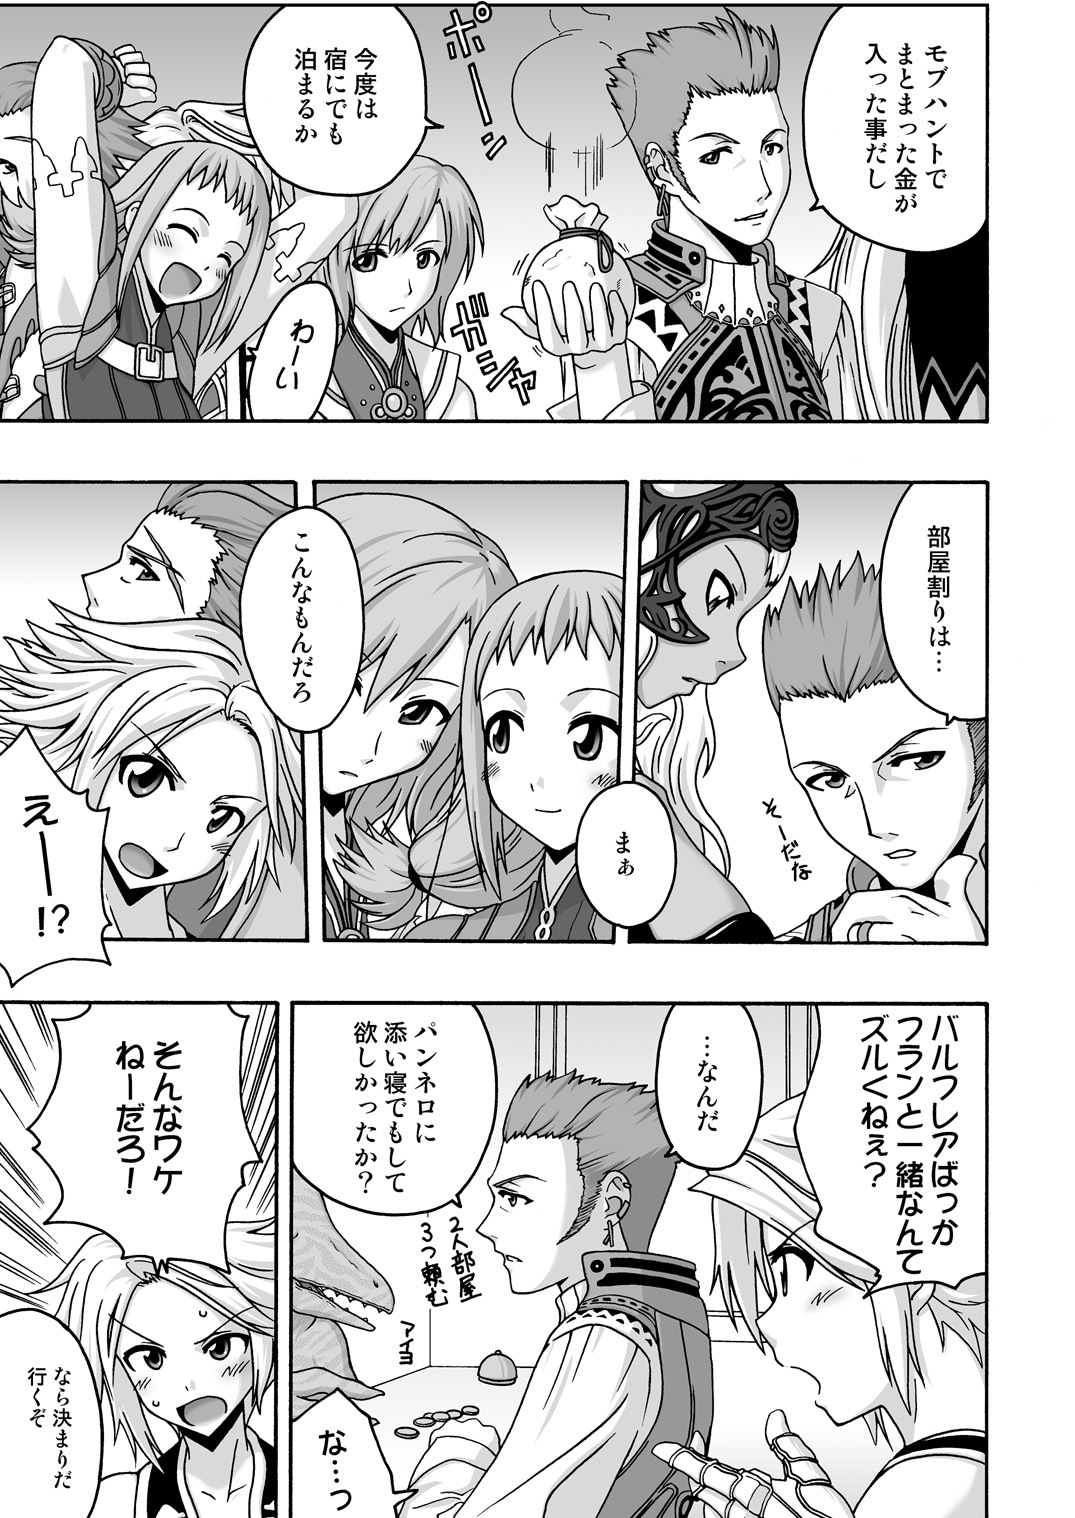 (C70) [FruitsJam (Mikagami Sou)] In the ROOM (Final Fantasy XII) page 2 full